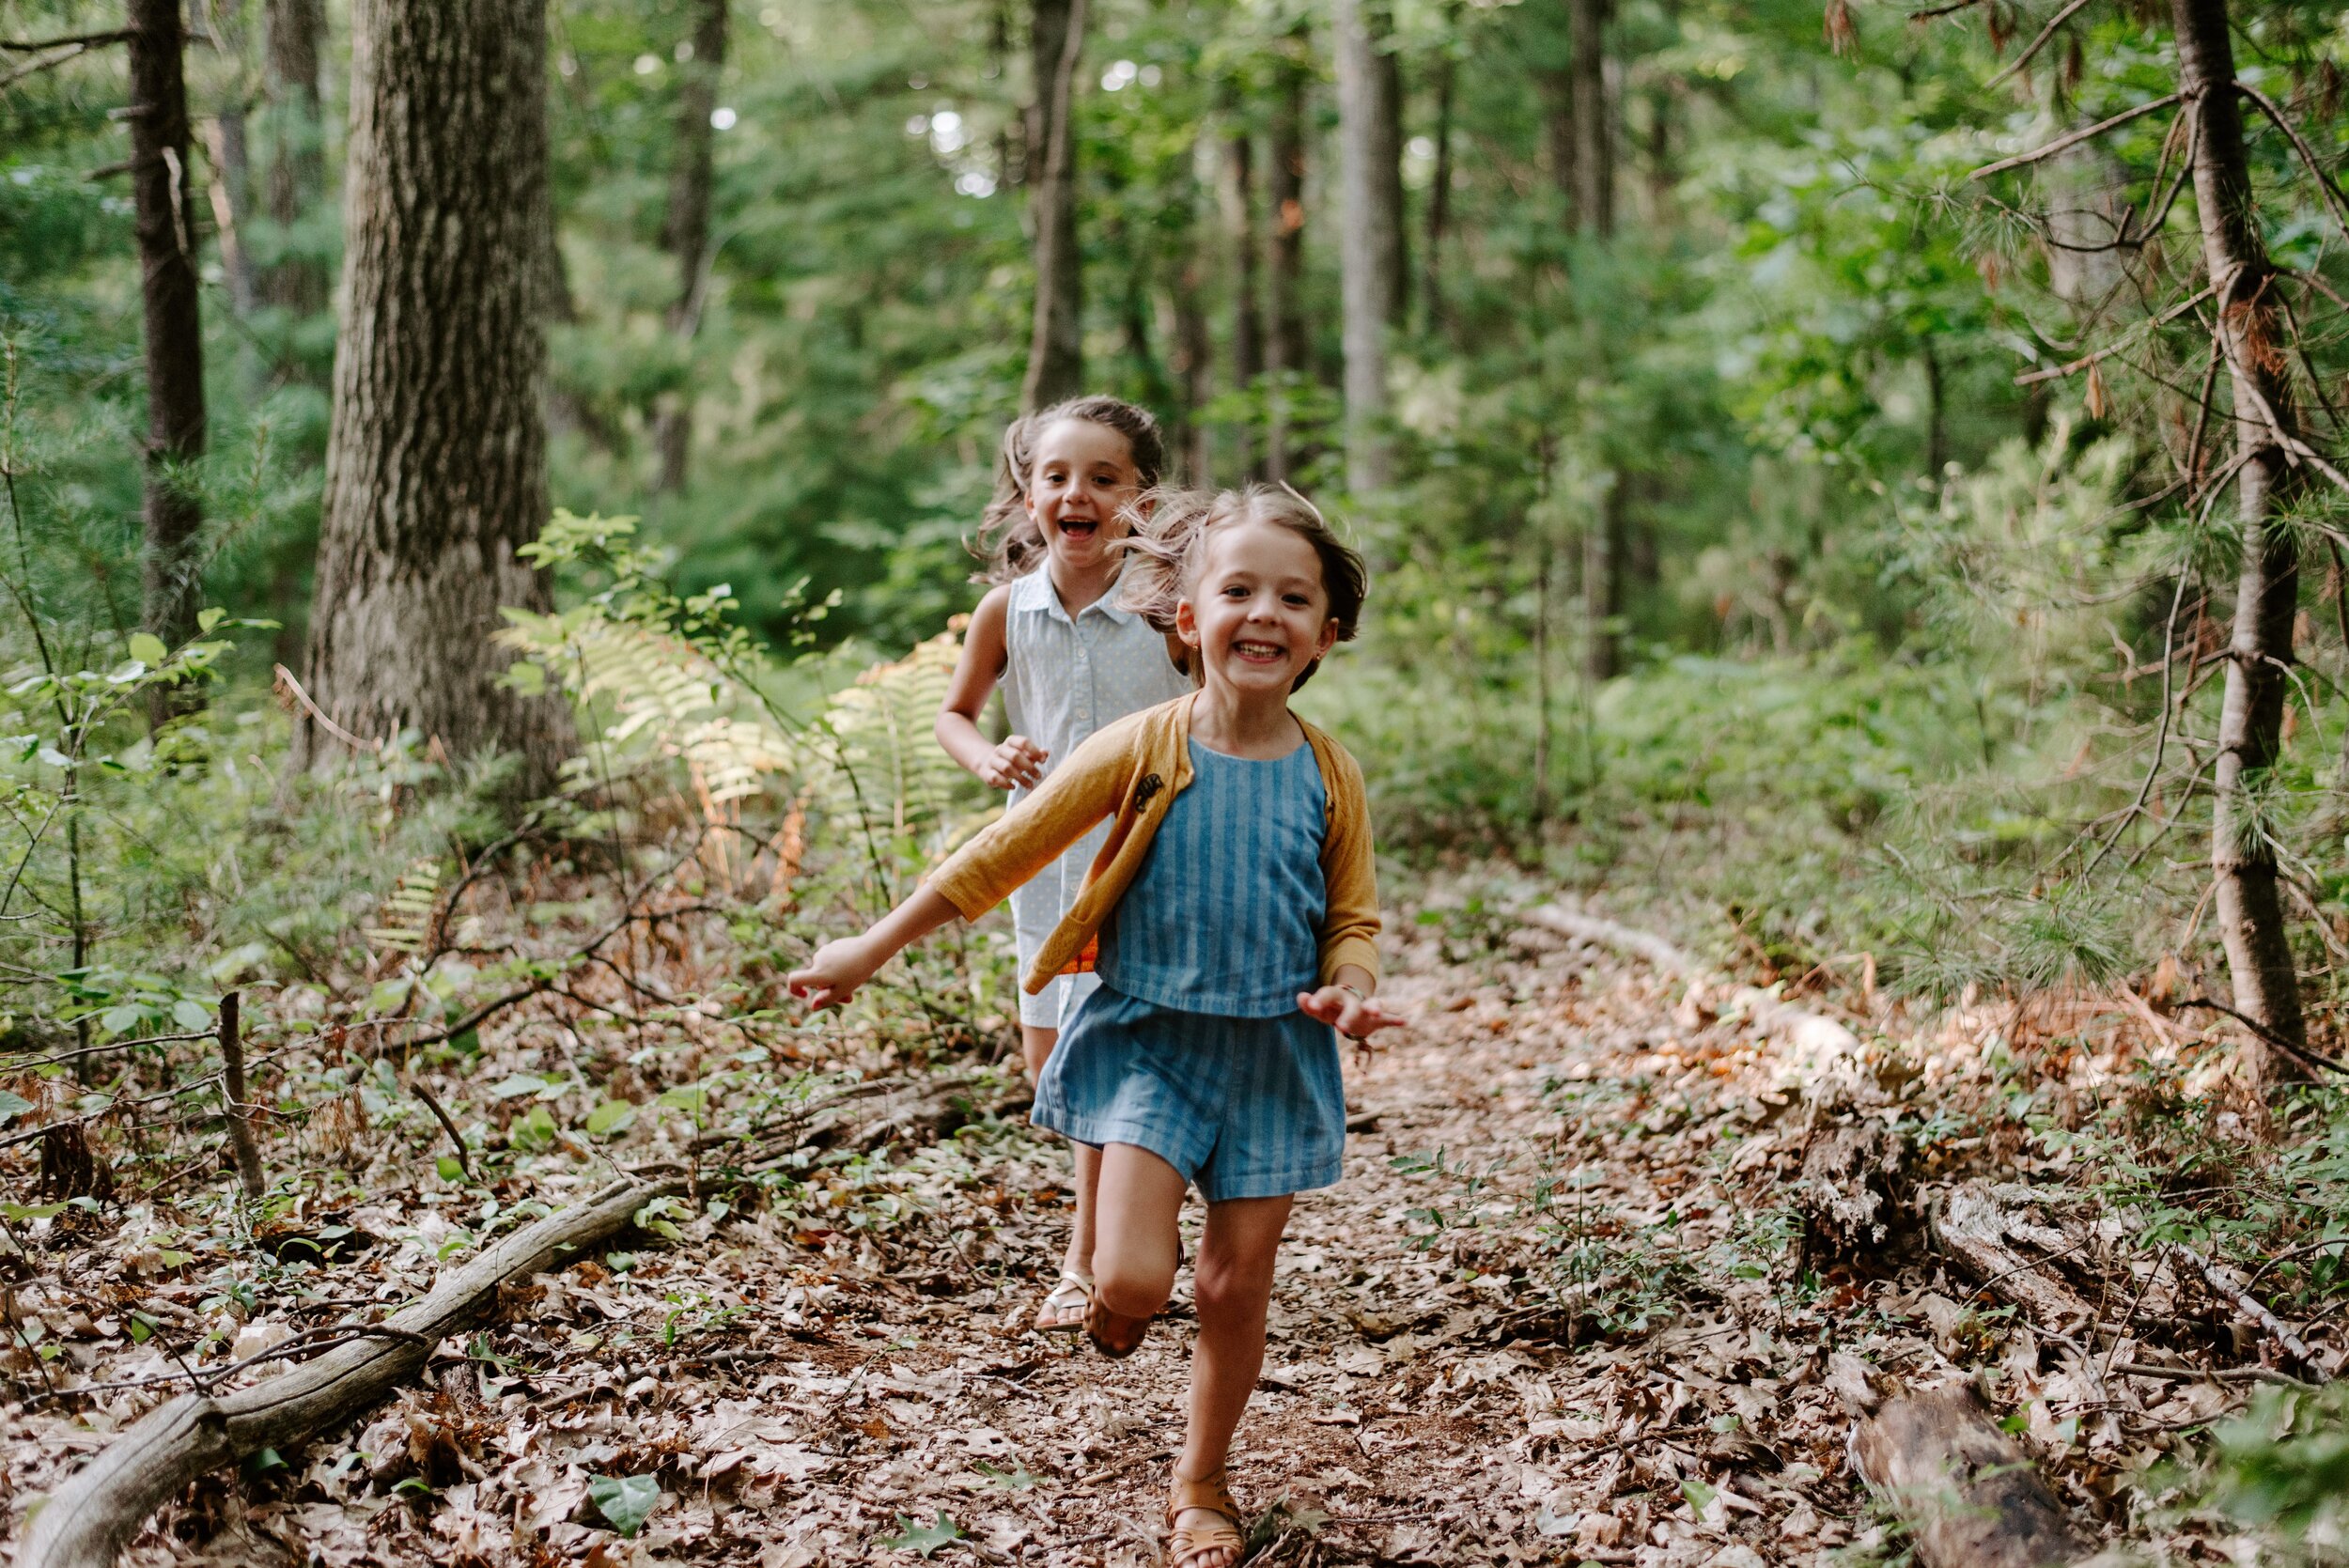 New York Westchester Lifestyle Photographer Summer Family Photos Outdoors Kids Playing Sisters.jpg